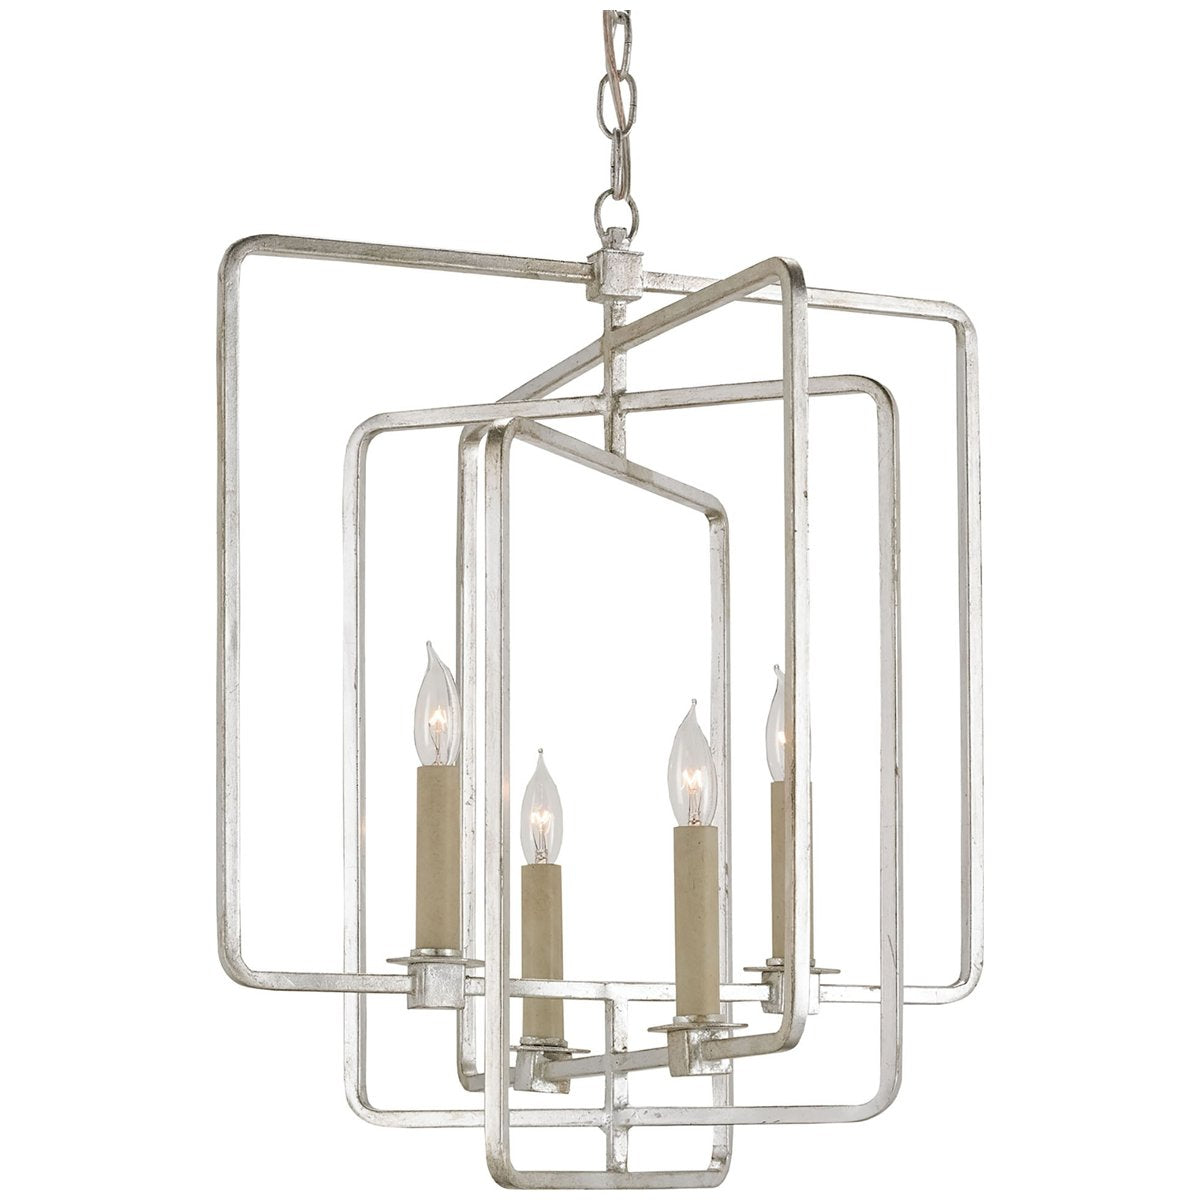 Currey and Company Metro Silver Square Chandelier